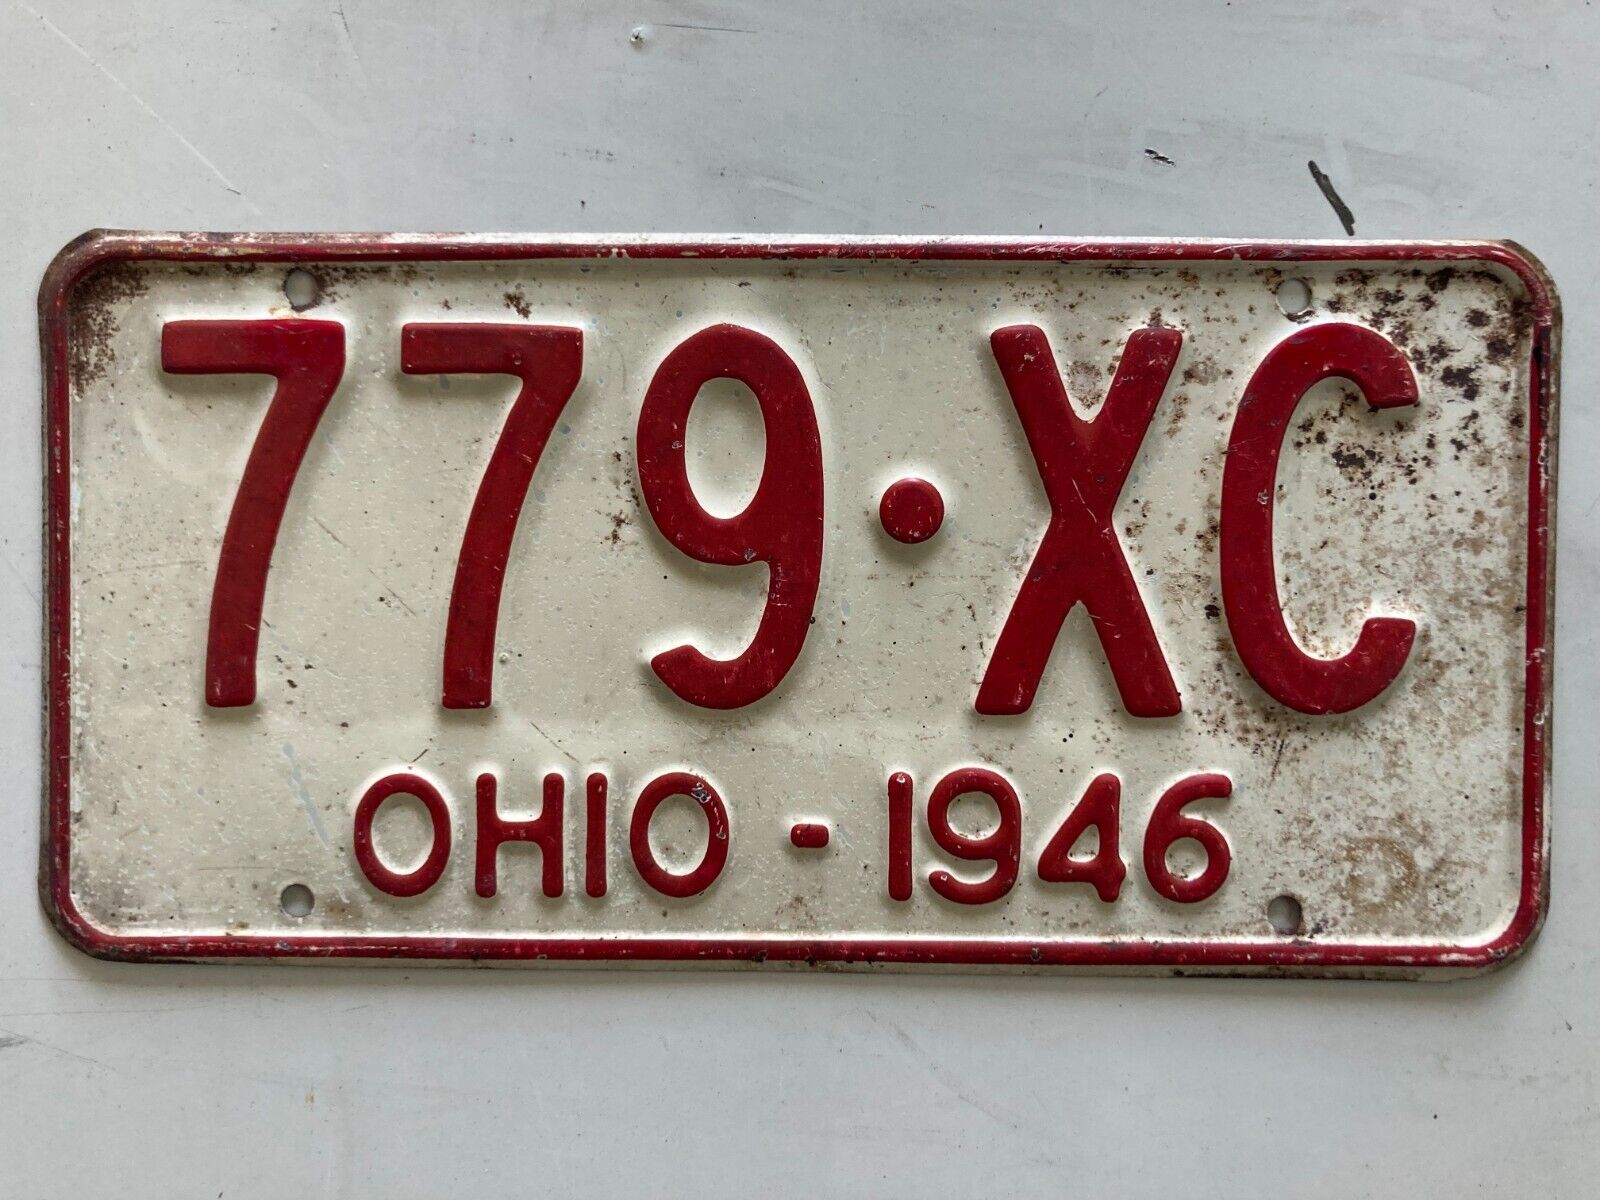 1946 OHIO LICENSE PLATE 779 XC MAN CAVE CHEVY FORD DODGE CHRYSLER HOT ROD AUTO